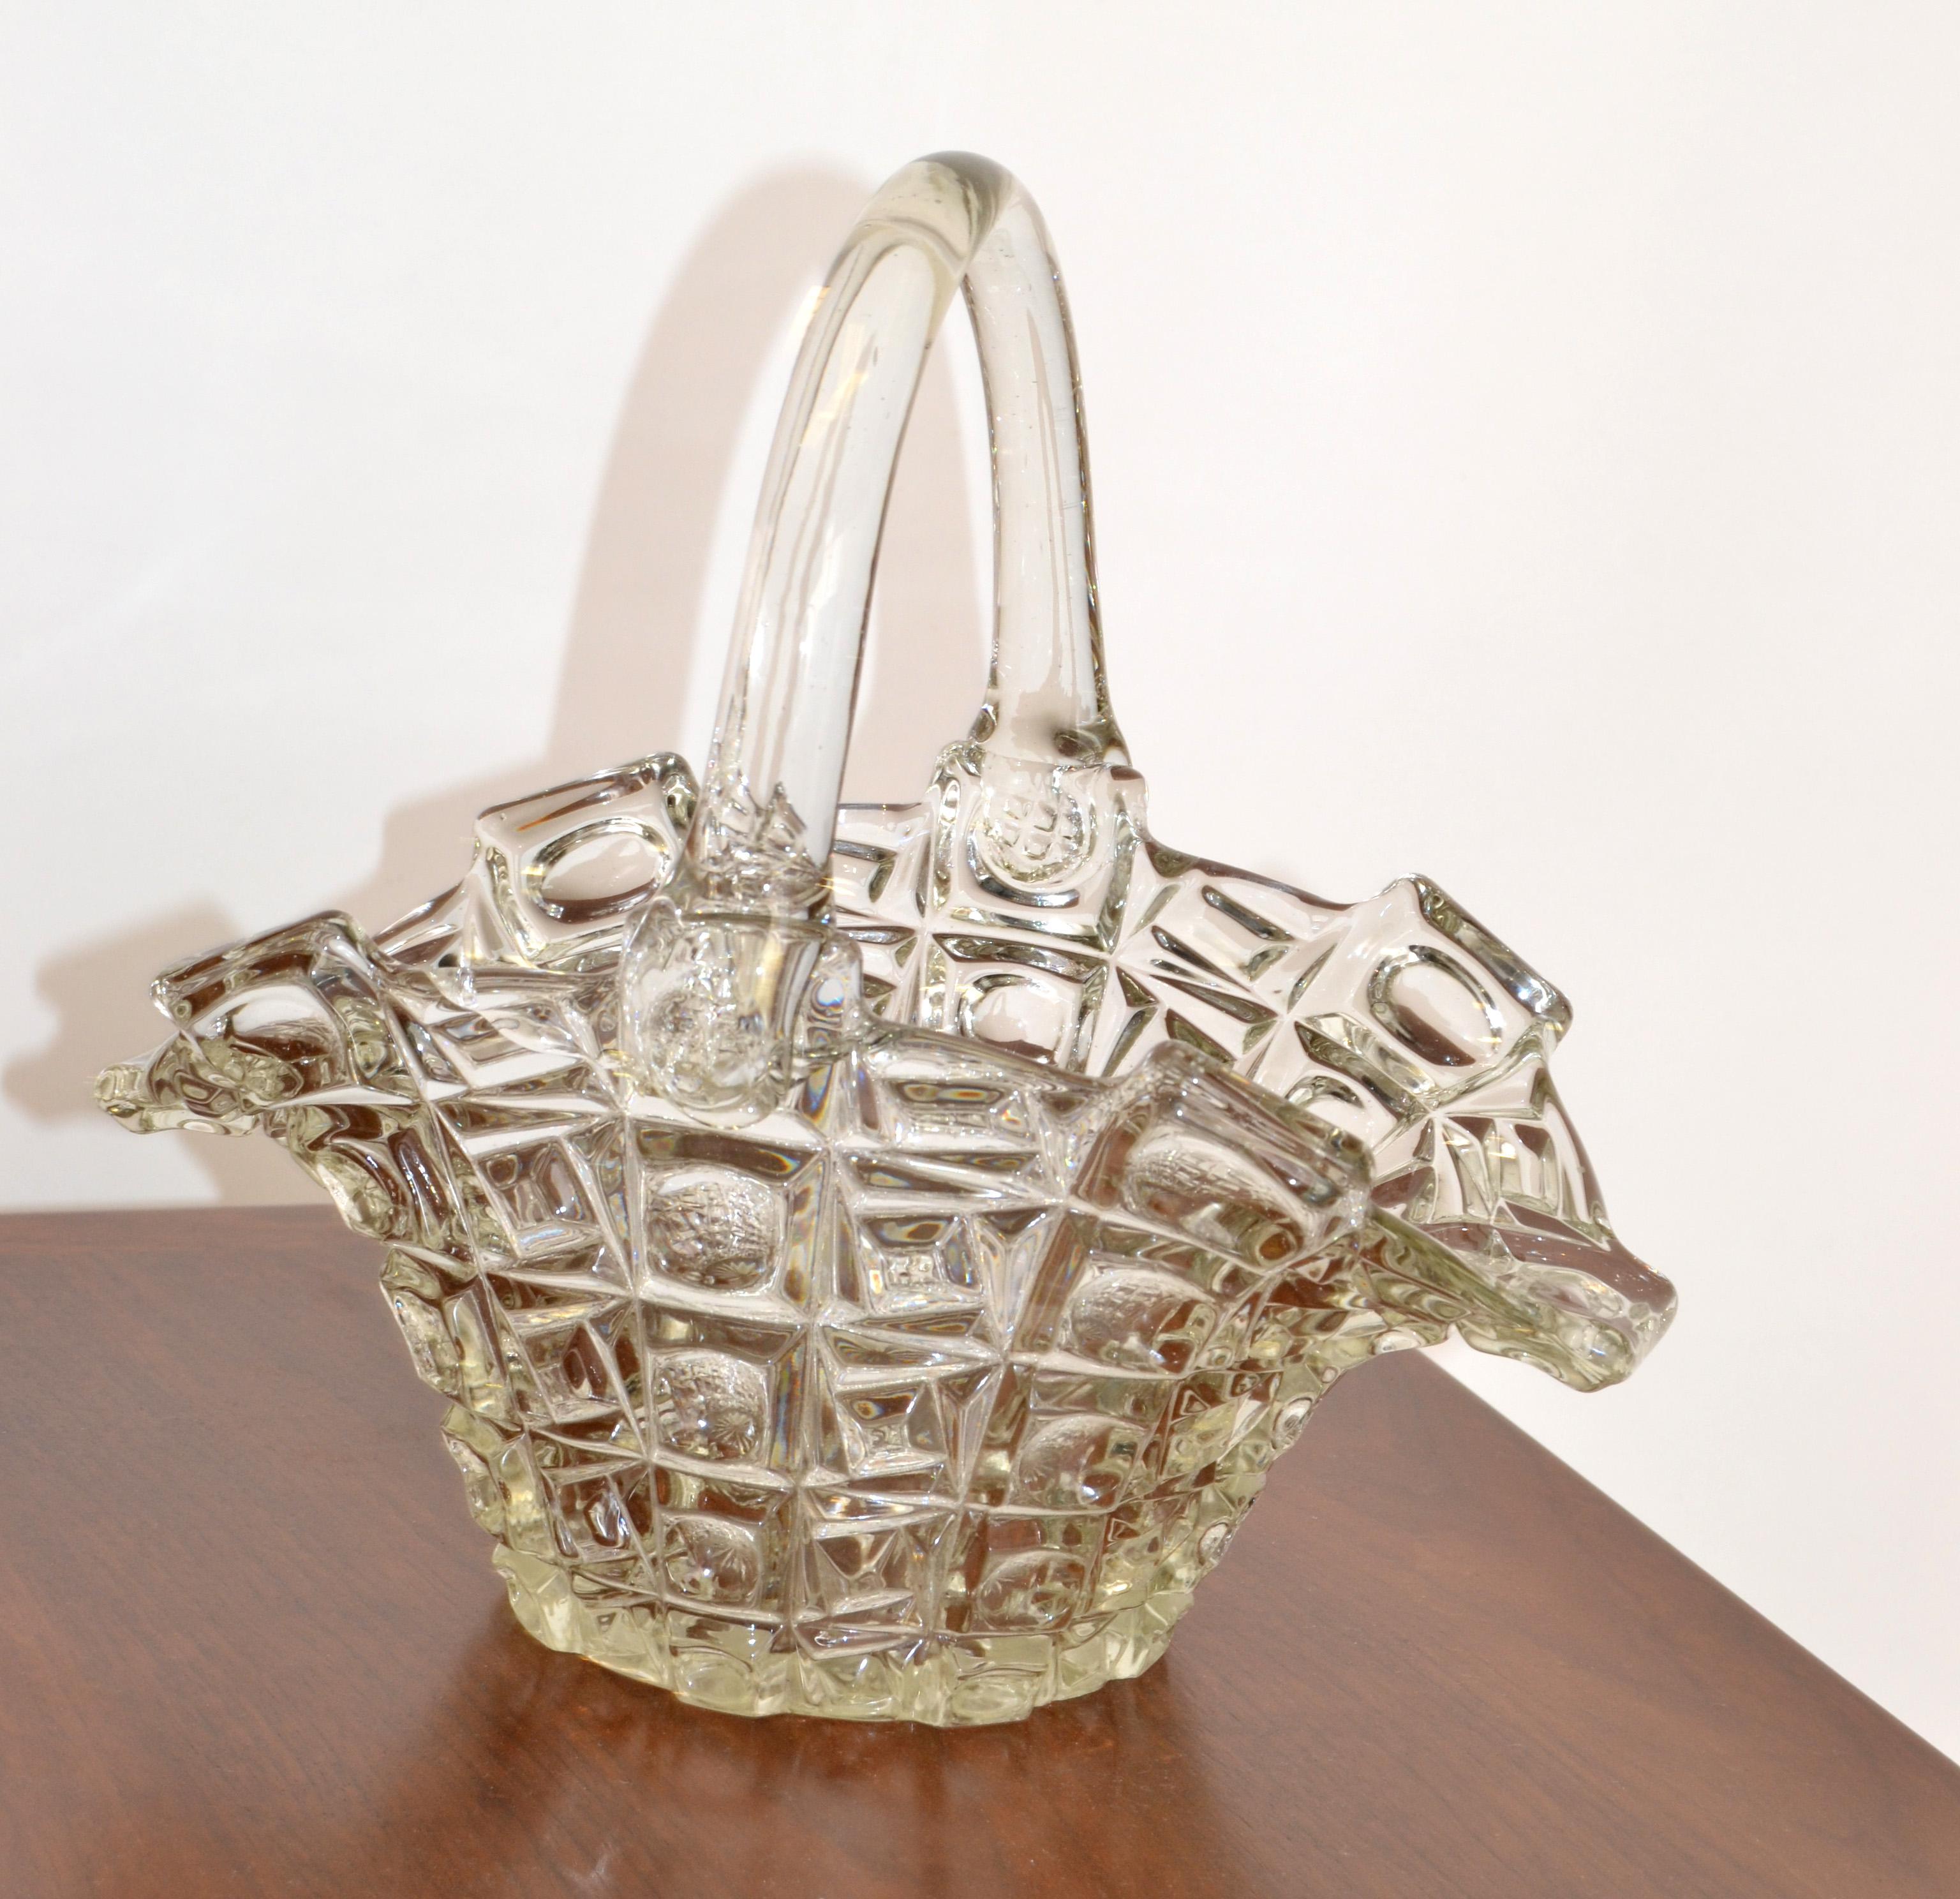 Vintage 1970s transparent crystal glass basket with Handle for a Bride, Flowers, Fruit or as a Centerpiece with Your favorite Snacks.
In all very good condition.